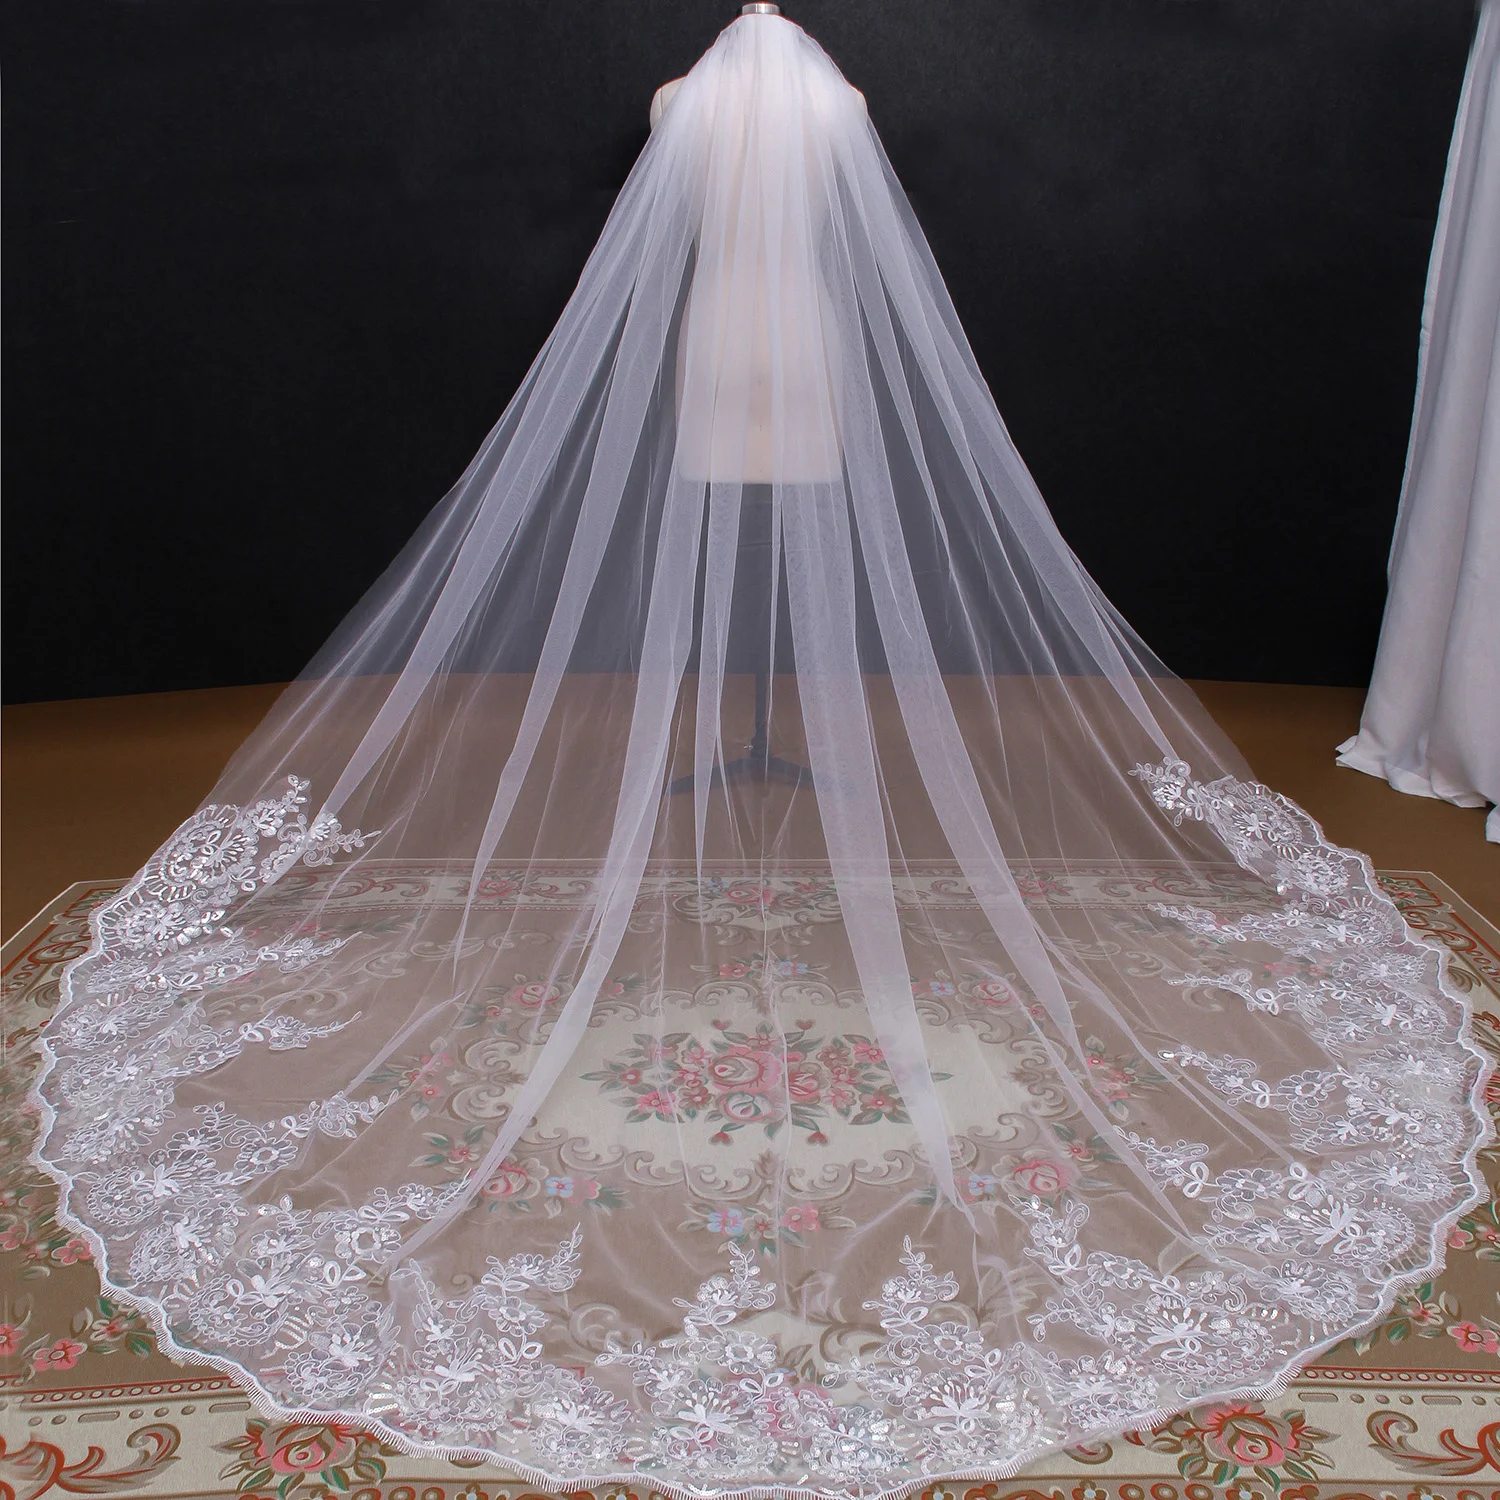 

NZUK Long Cathedral One-Layer 3Meters Bridal Veil Sequins Applique Wedding Veil Lace Edge White/Ivory Veil With Comb Luxurious